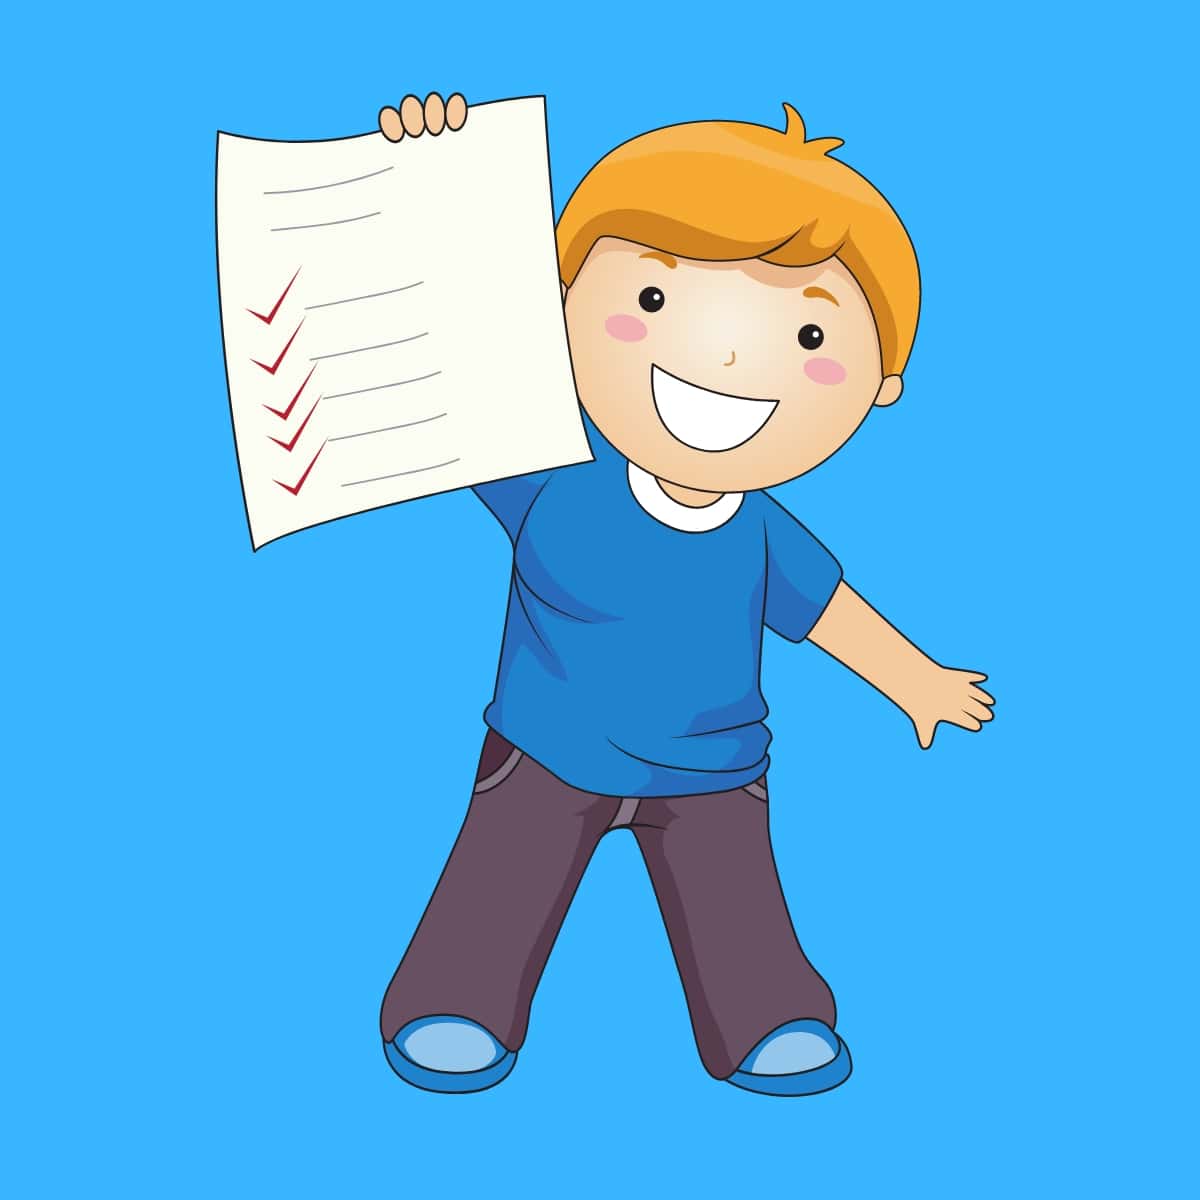 A cartoon graphic of a boy holding a marked exam and smiling on a blue background.